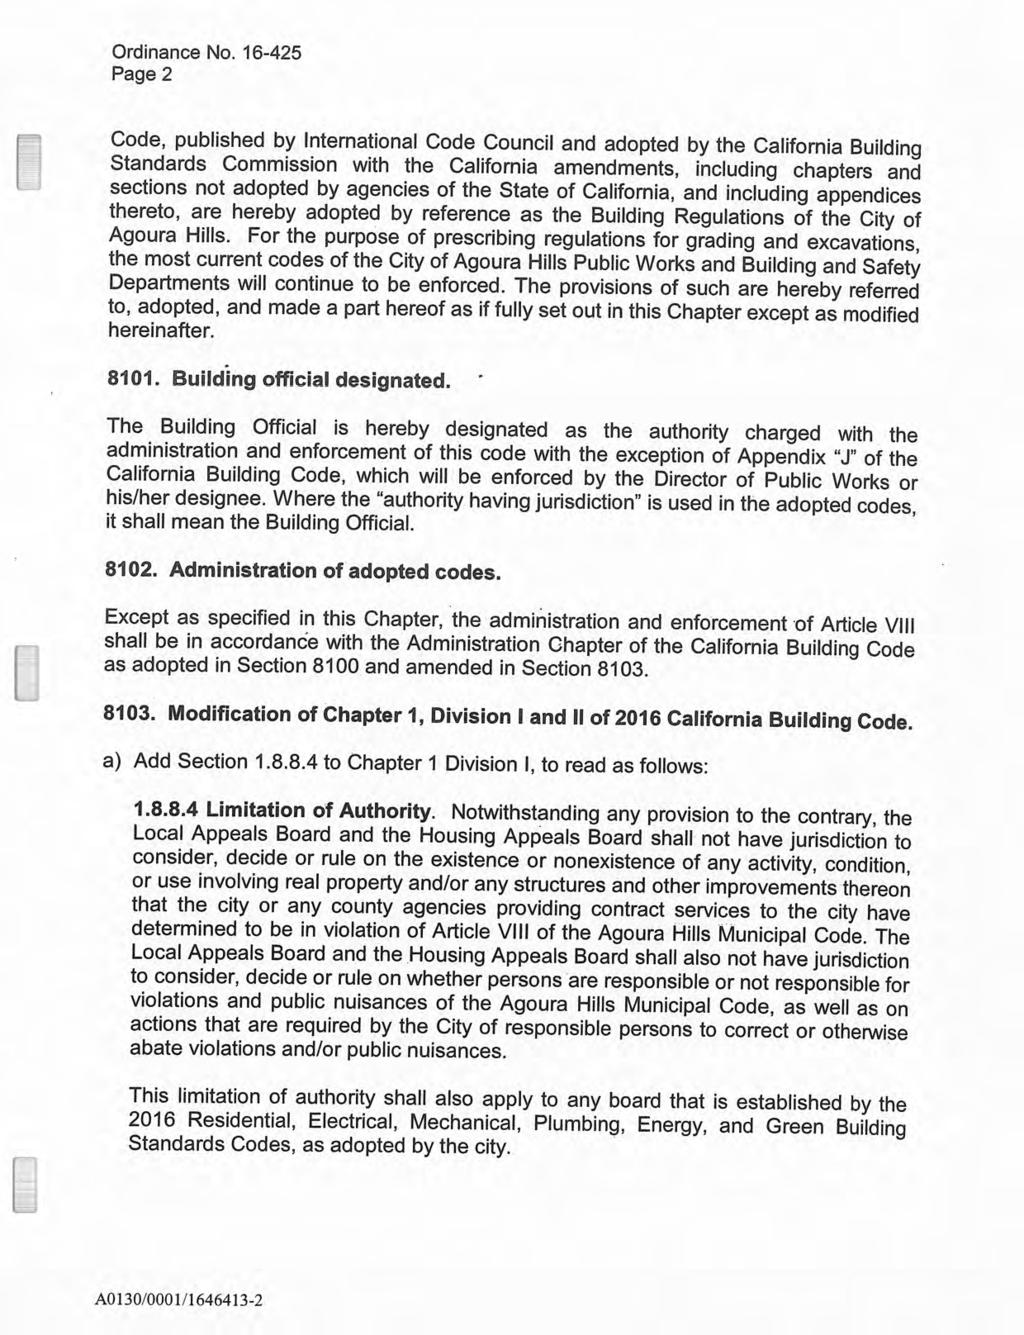 Page 2 Code, published by International Code Council and adopted by the California Building Standards Commission with the California amendments, including chapters and sections not adopted by